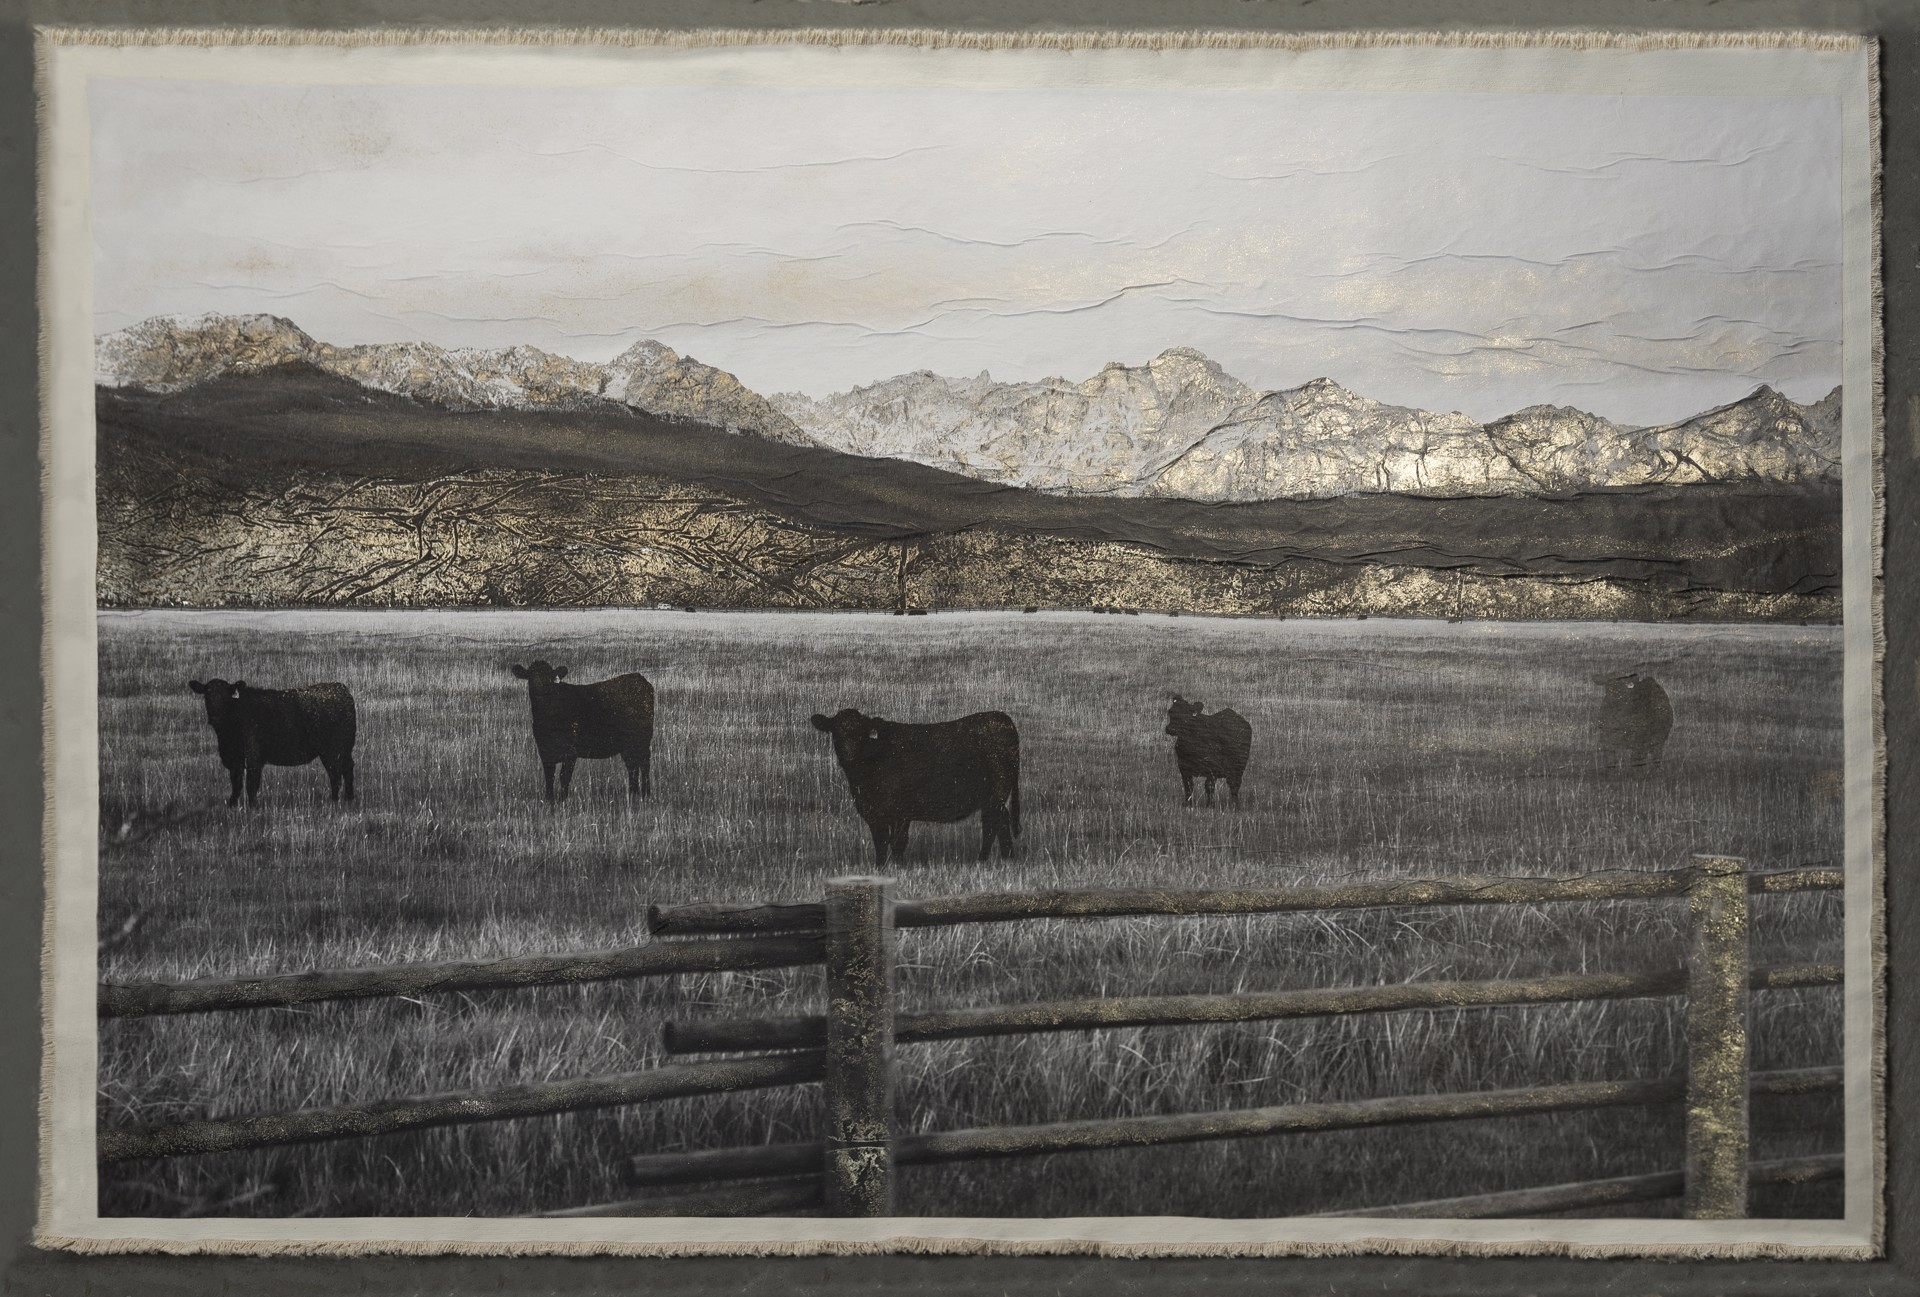 Cattle in the Sawtooth Valley by Bill Claps